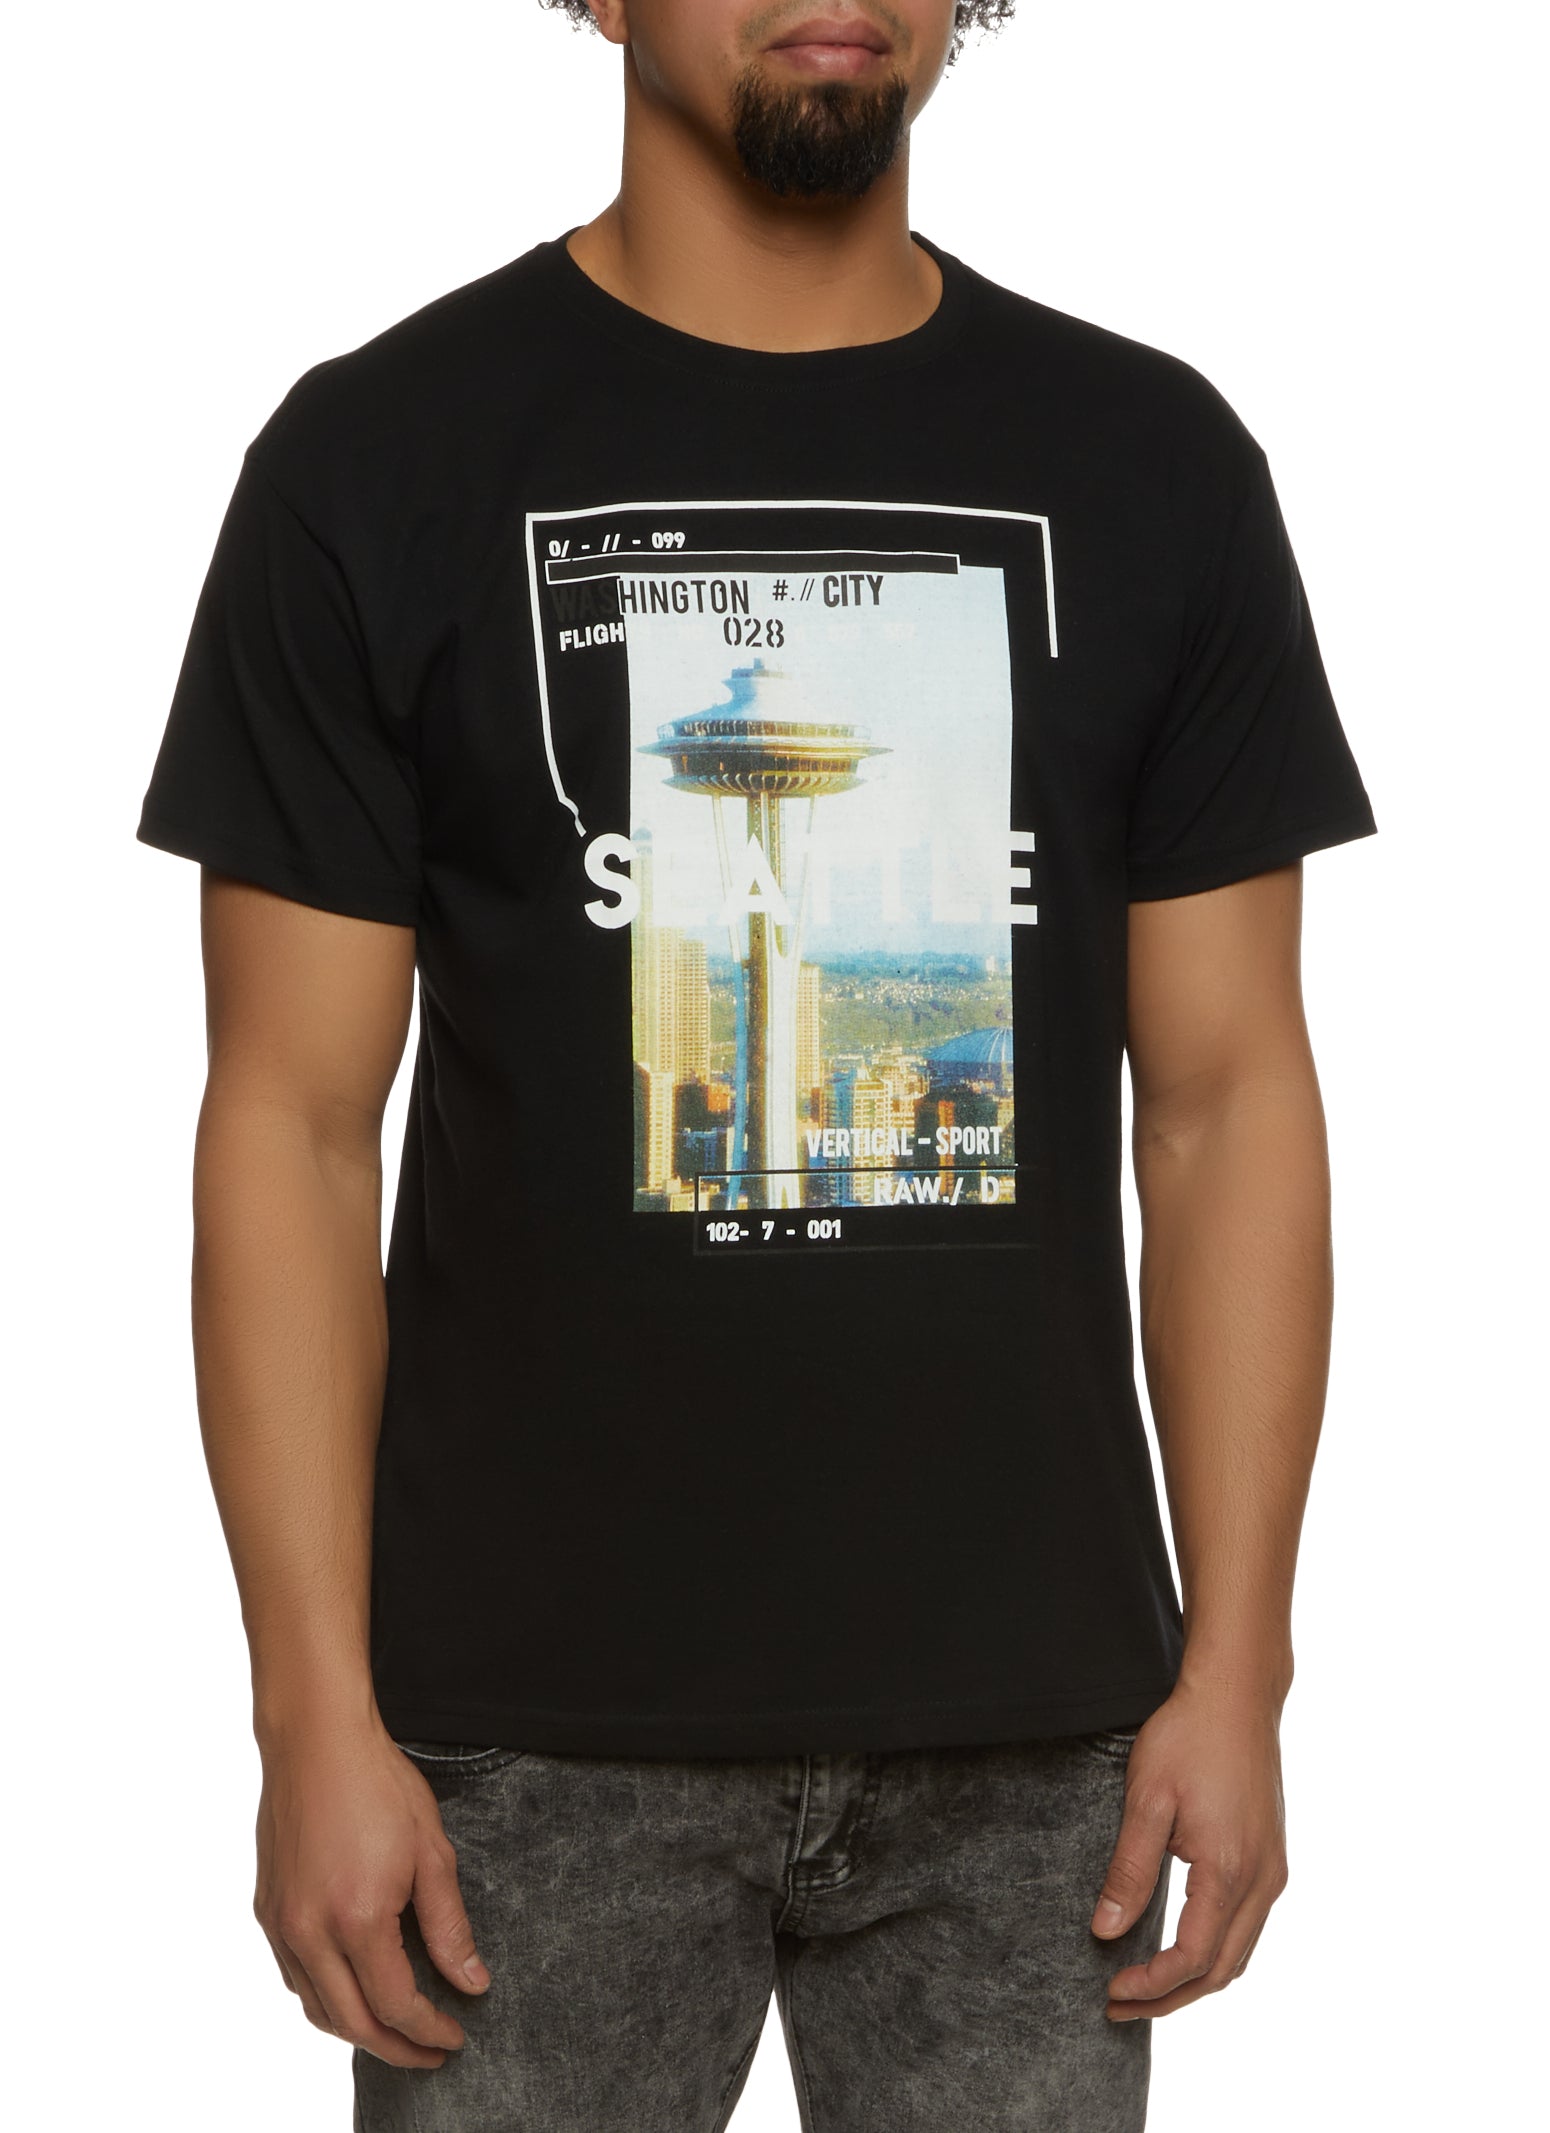 Womens Mens Seattle Graphic T Shirt,